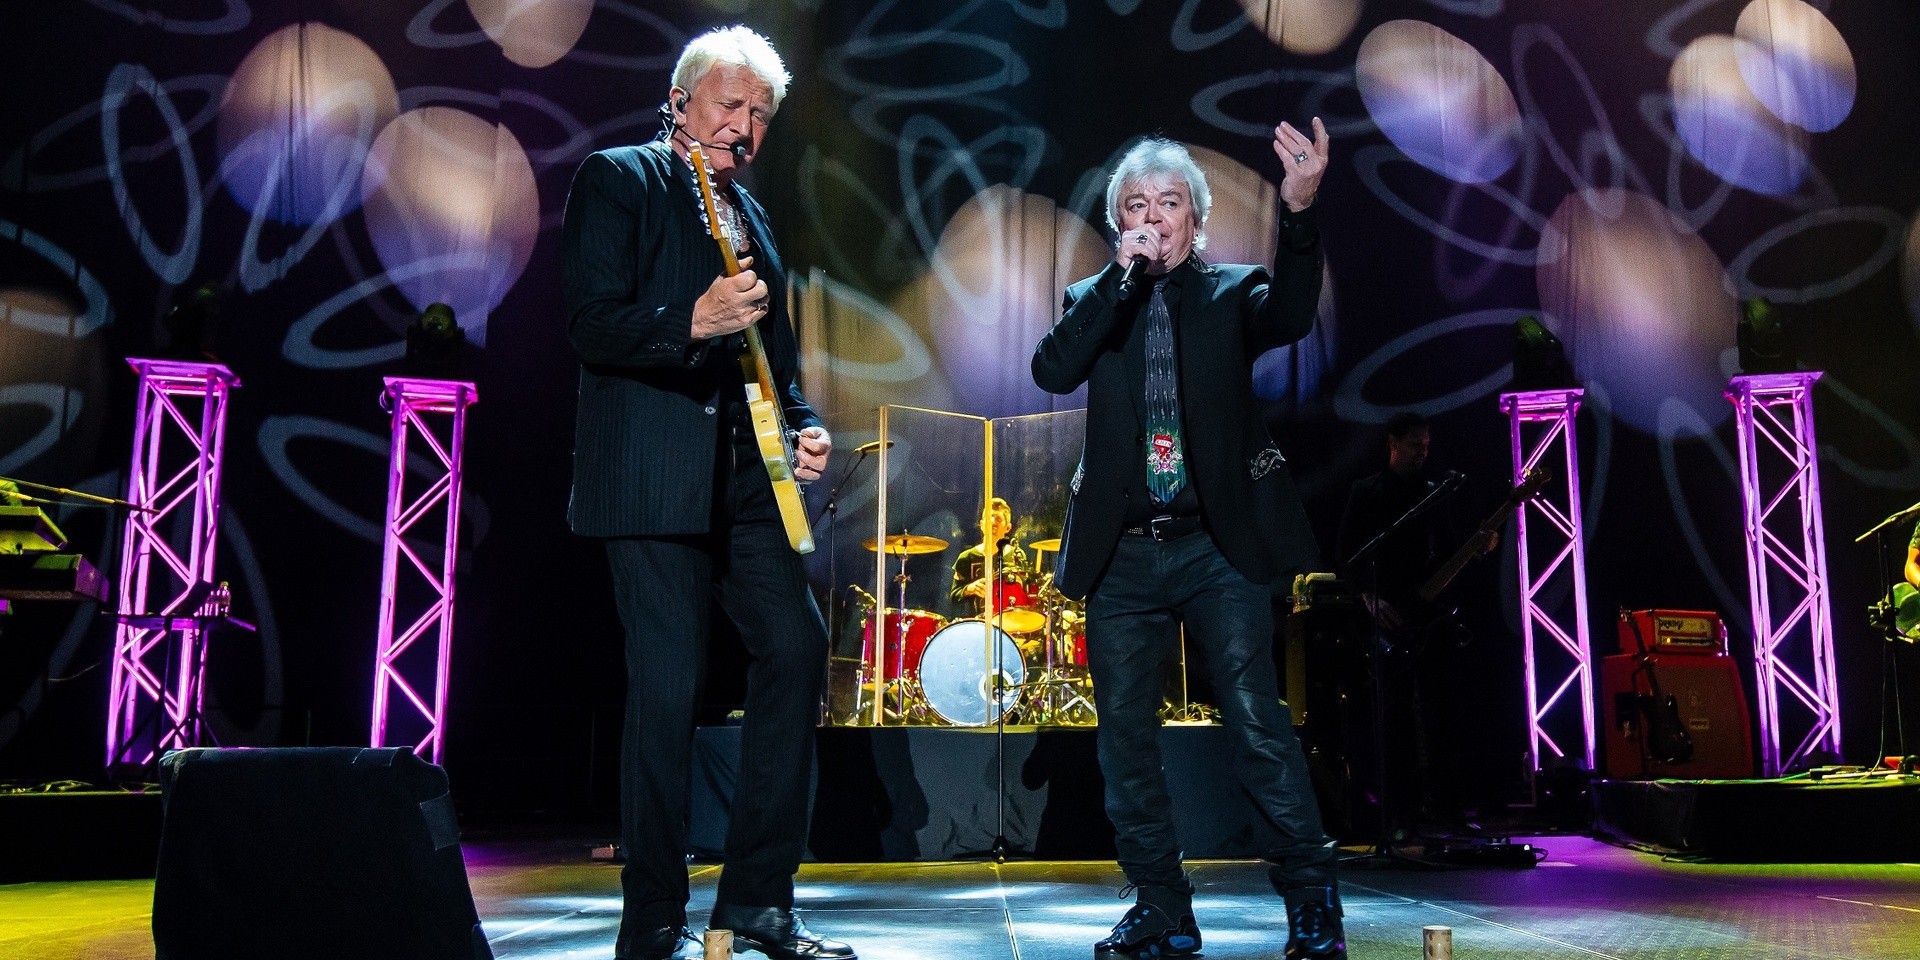 Old hits enchant anew at Air Supply's concert in Singapore – gig report